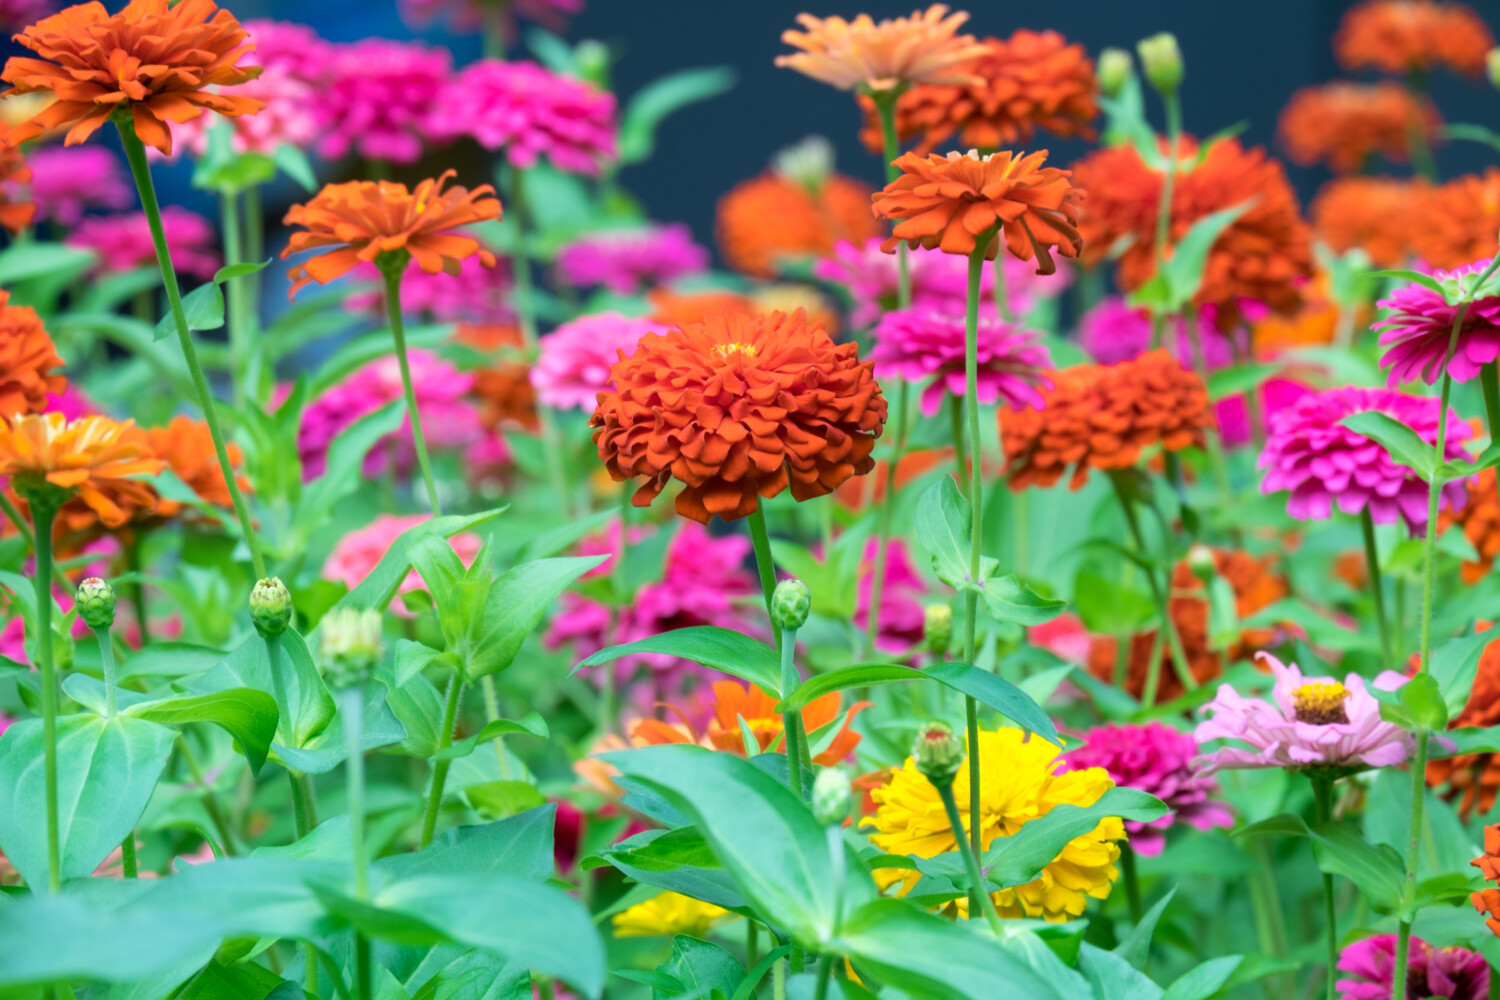 Zinnia flowers in bloom in reds, yellows and pinks